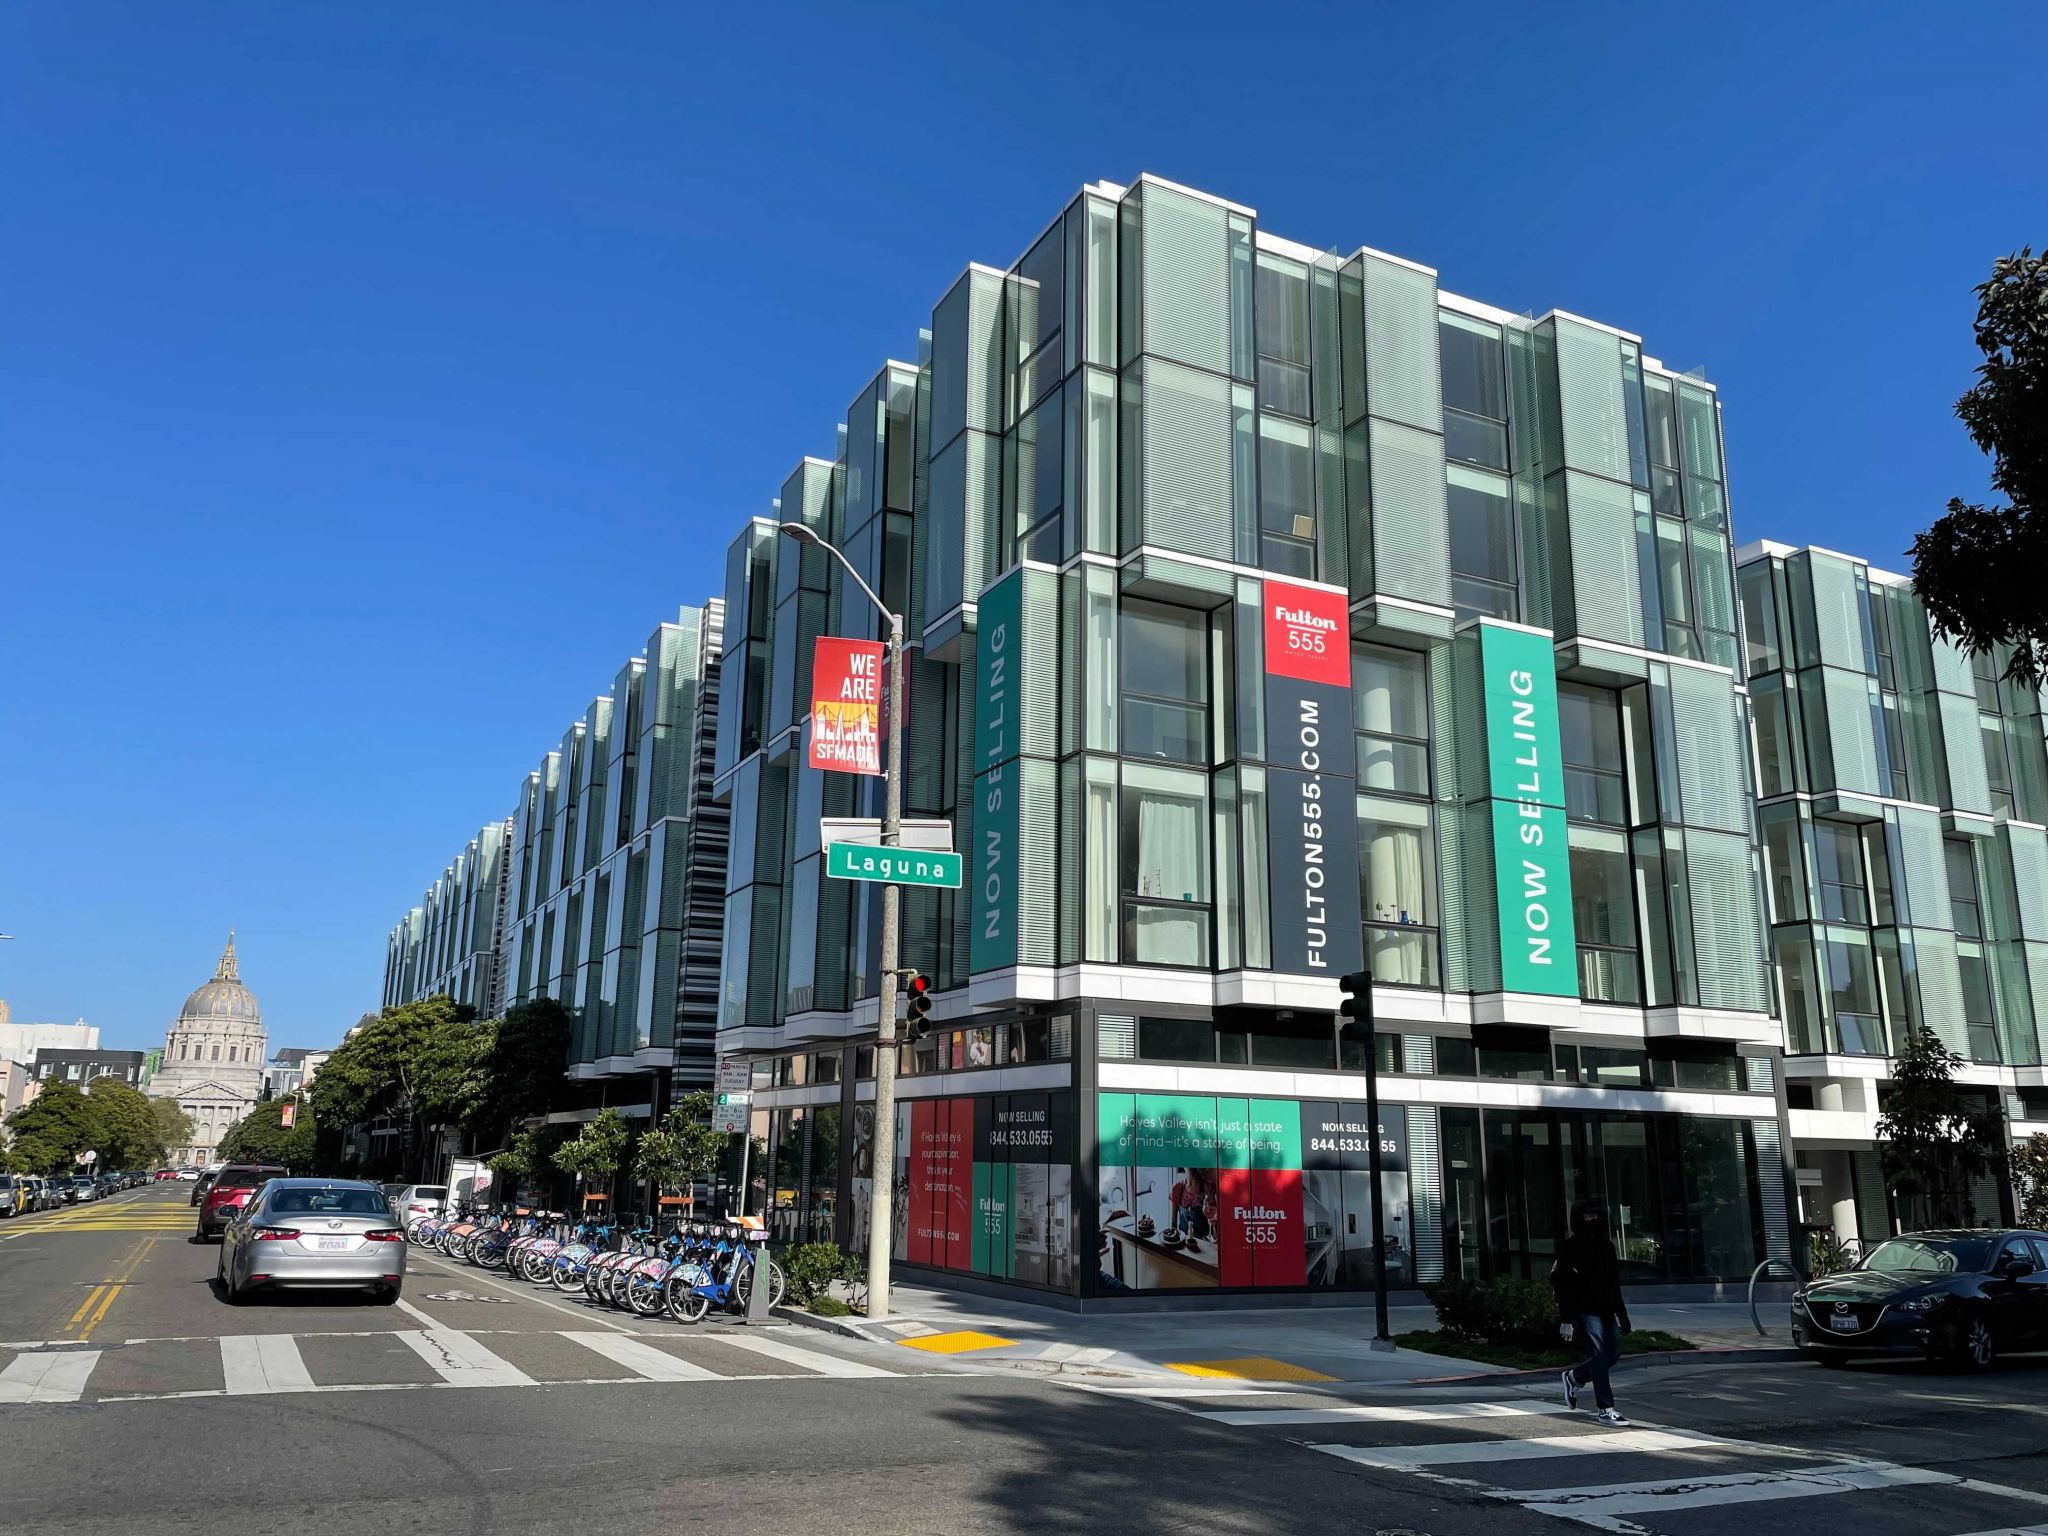 Merchant Joe Moves Ahead with Opening of New San Francisco Store